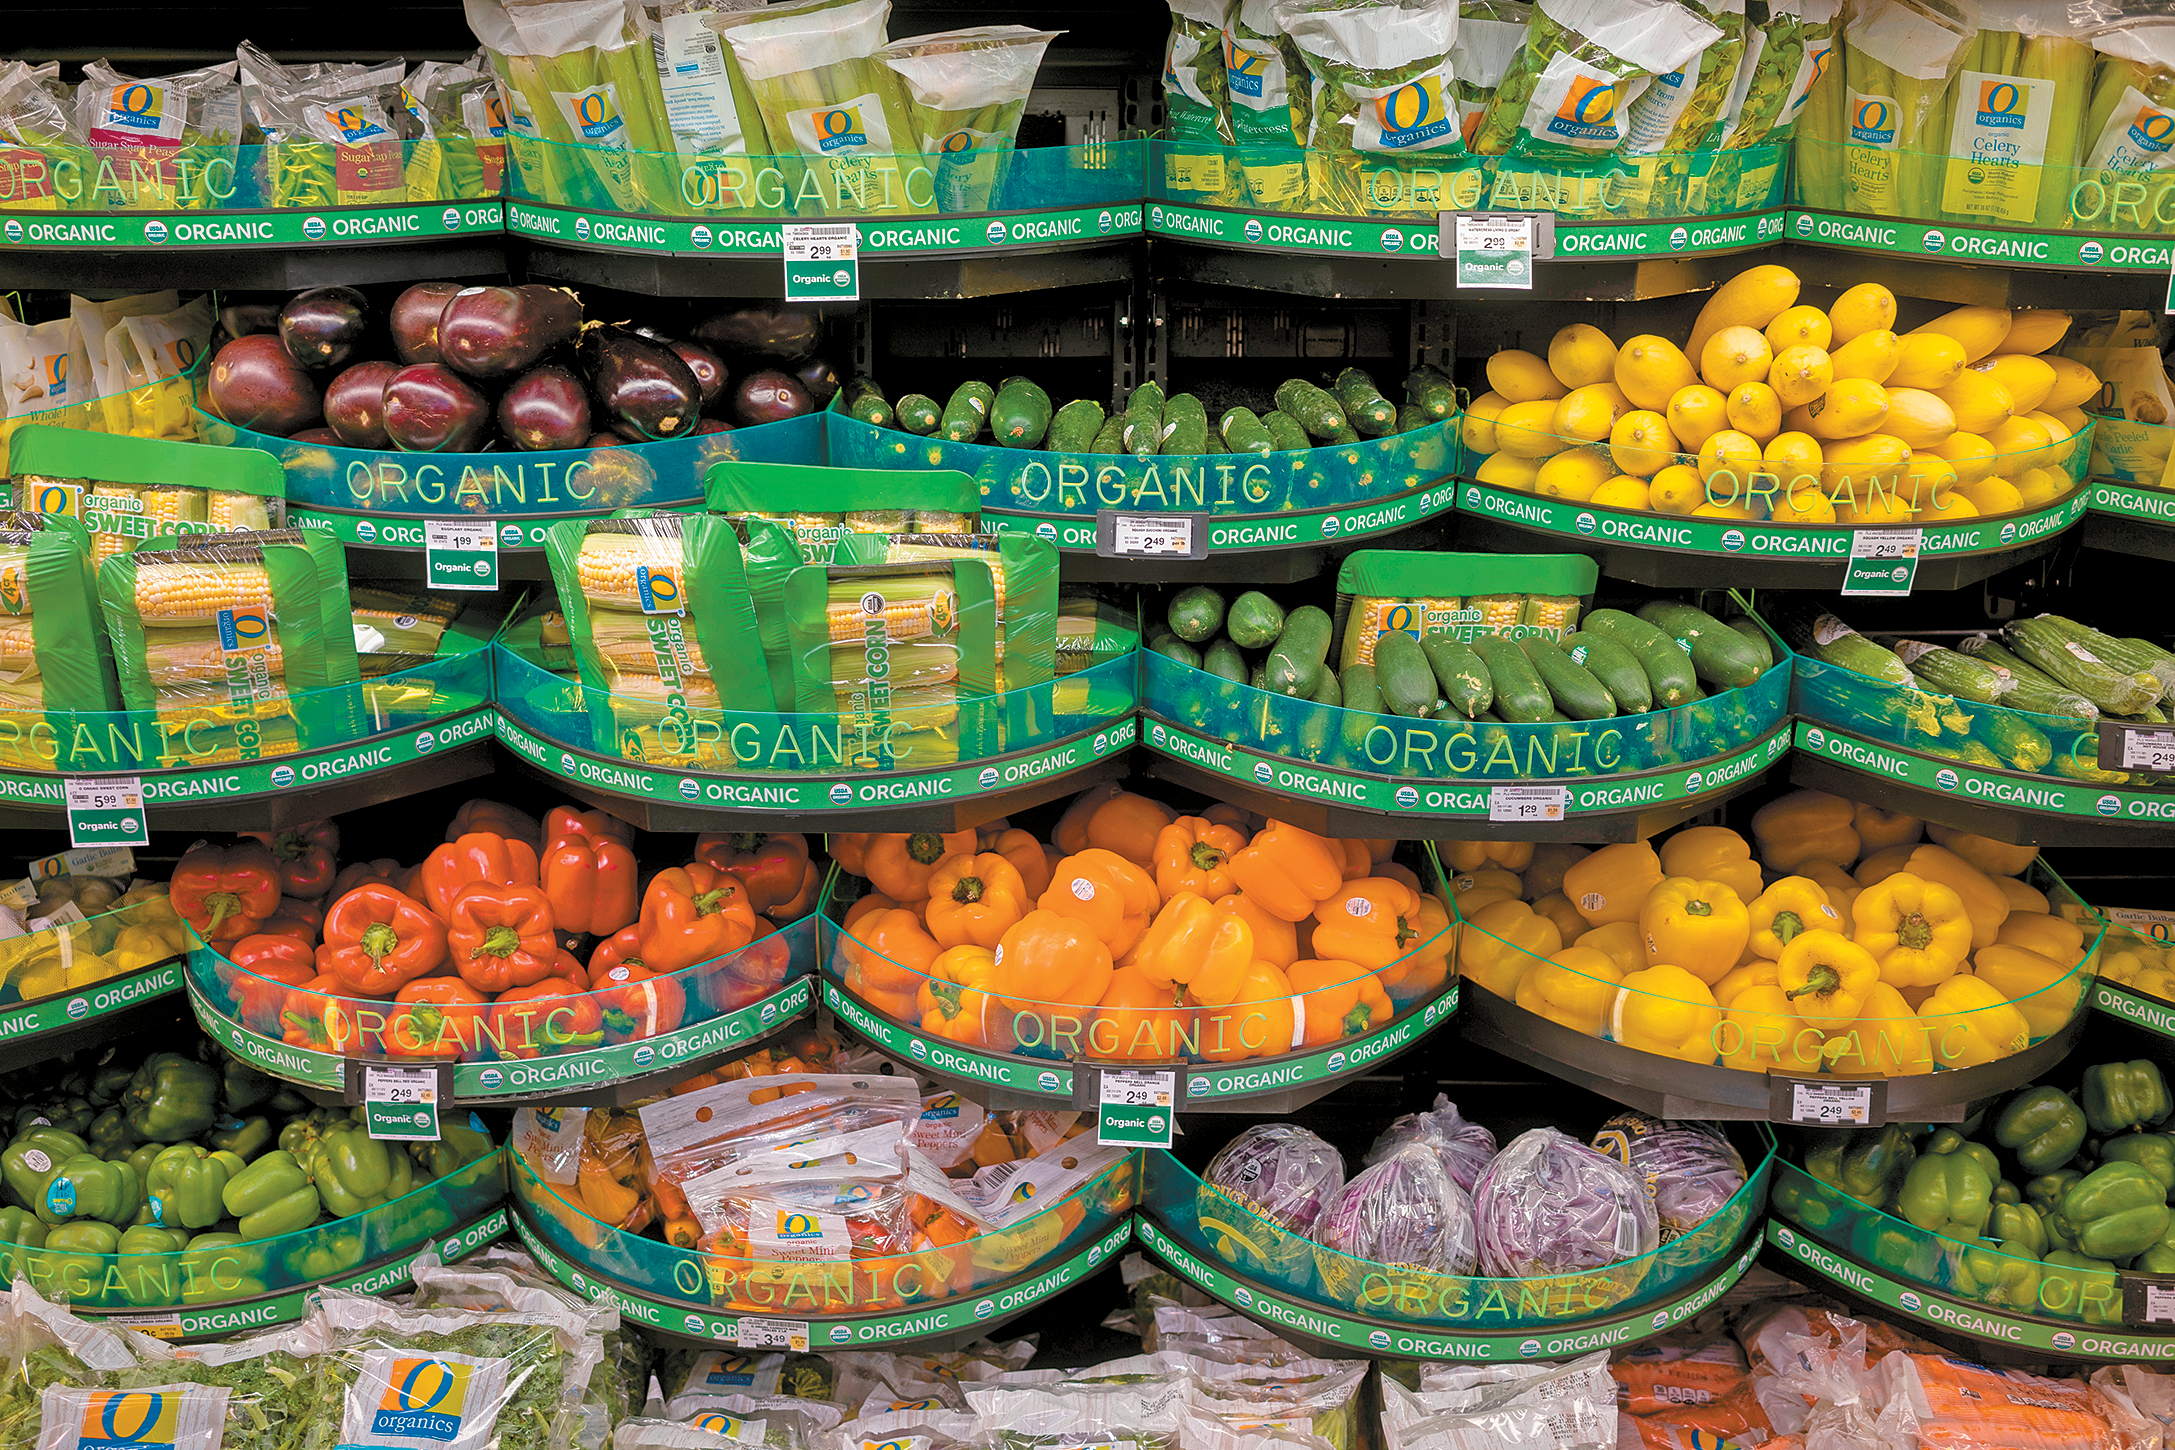 Demand grows for organic produce, despite inflation